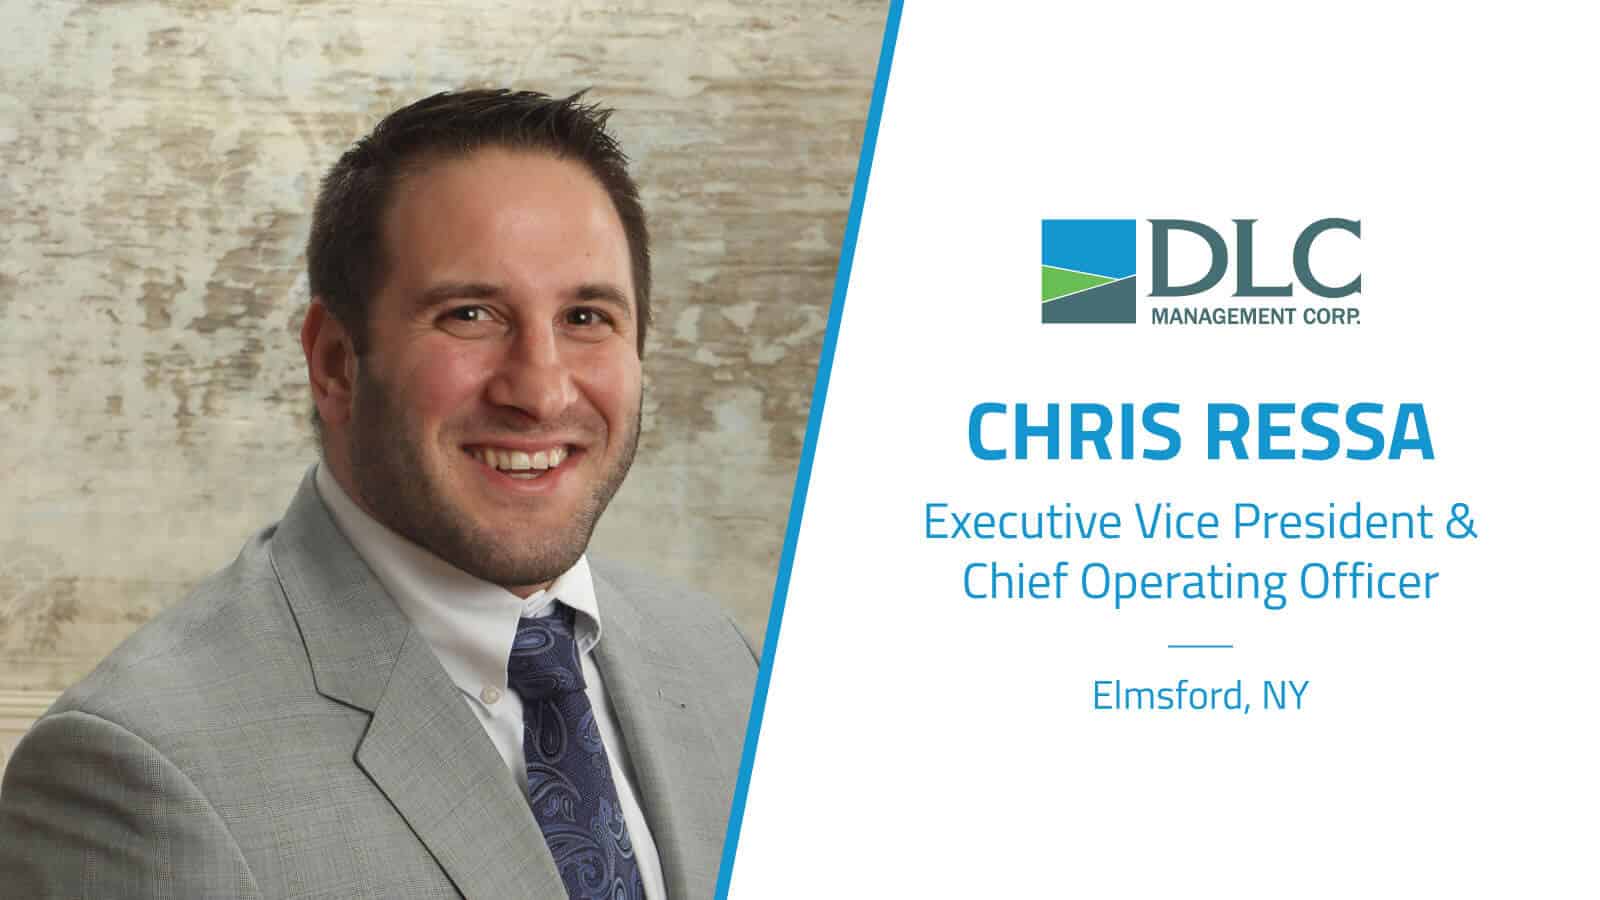 Chris Ressa headshot with a graphic "Chris Ressa: Executive Vice President & Chief Operating Officer"